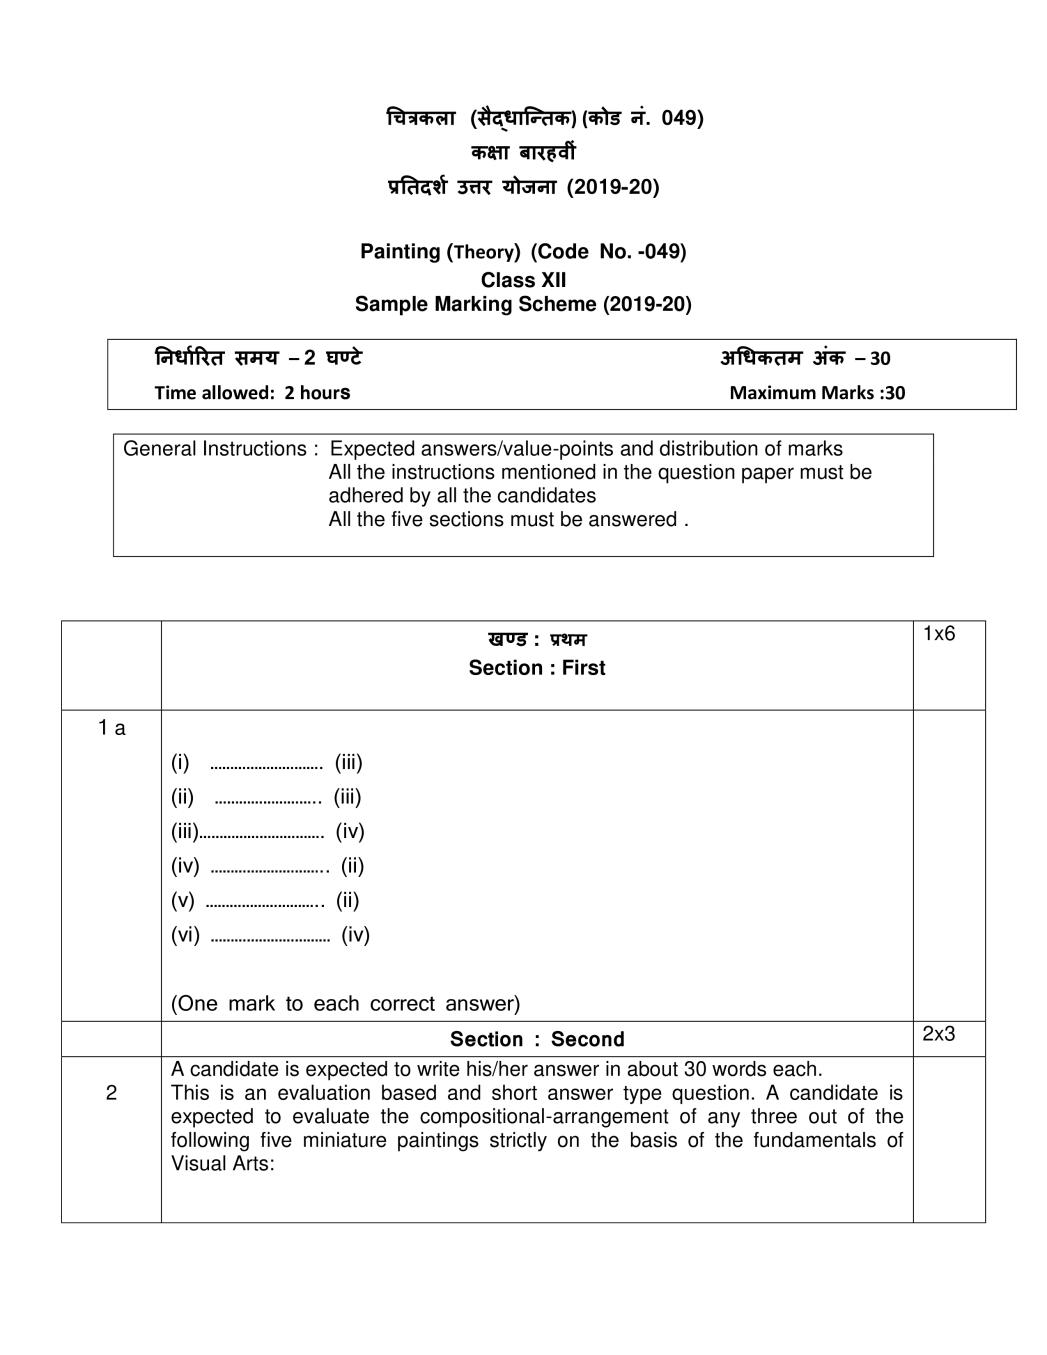 CBSE Class 12 Marking Scheme 2020 for Painting - Page 1